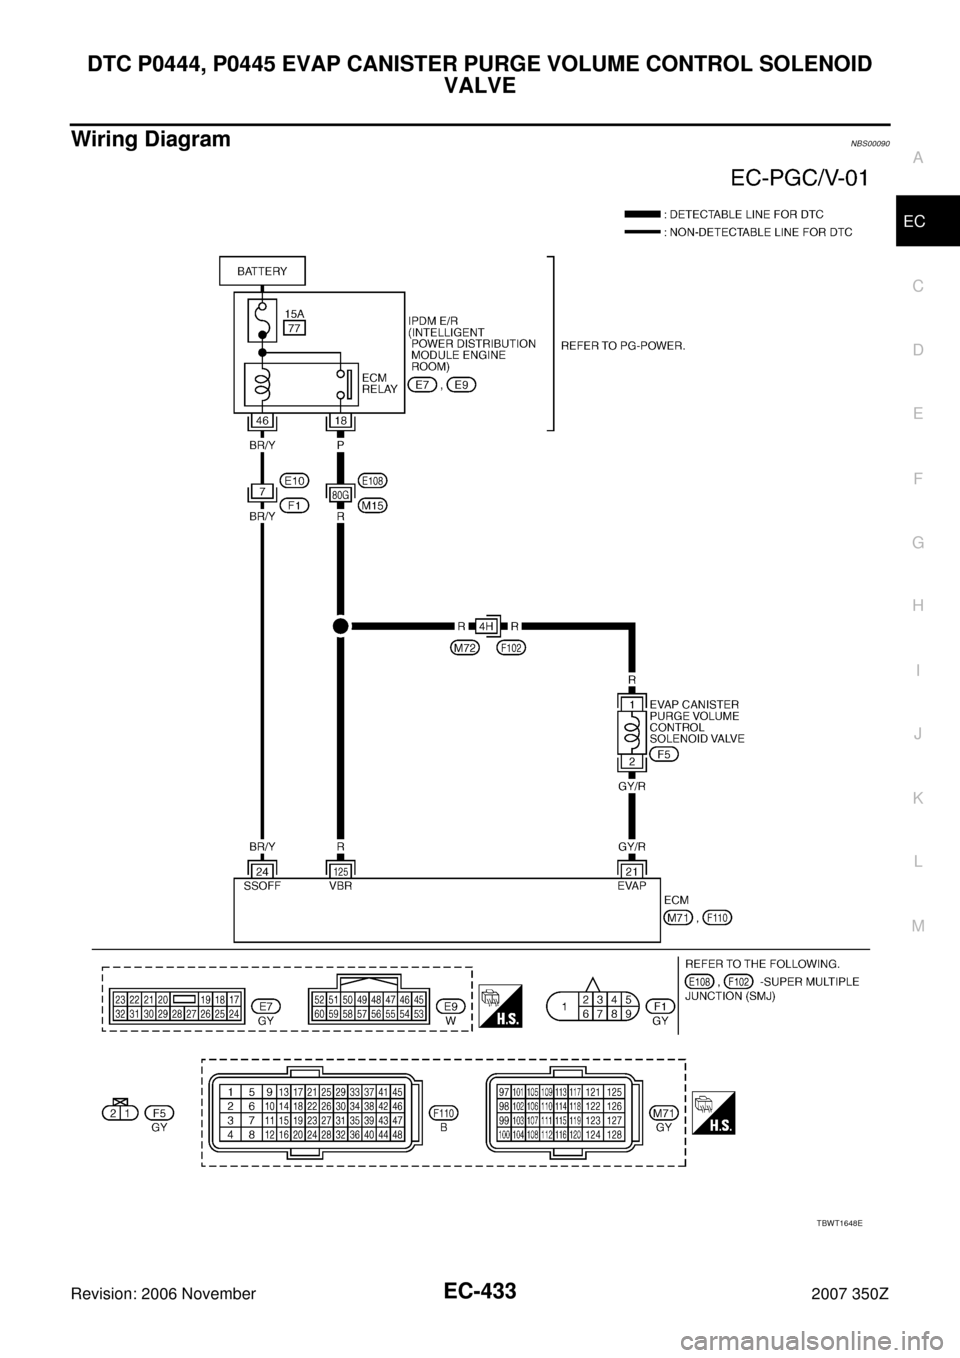 NISSAN 350Z 2007 Z33 Engine Control Workshop Manual DTC P0444, P0445 EVAP CANISTER PURGE VOLUME CONTROL SOLENOID 
VALVE
EC-433
C
D
E
F
G
H
I
J
K
L
MA
EC
Revision: 2006 November2007 350Z
Wiring DiagramNBS00090
TBWT1648E 